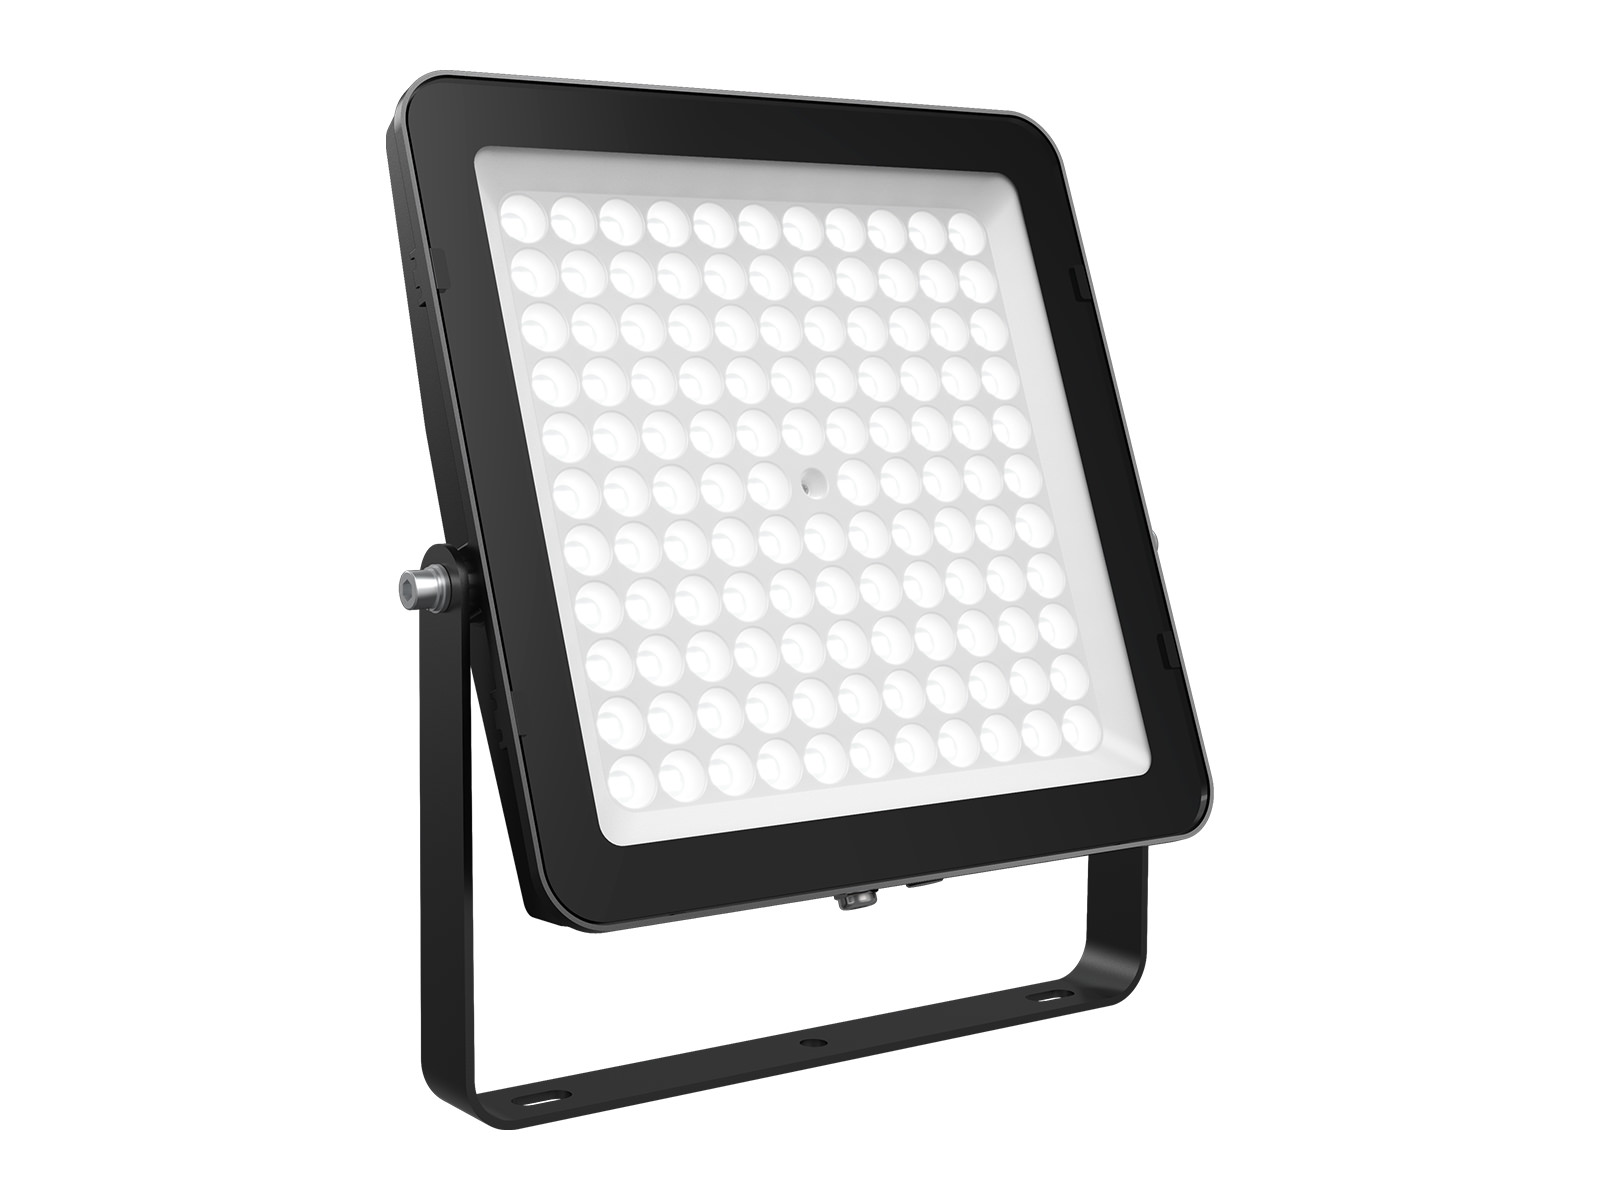 FL51 50W to 300w Cost-Effective And Anti-Glare LED Floodlight